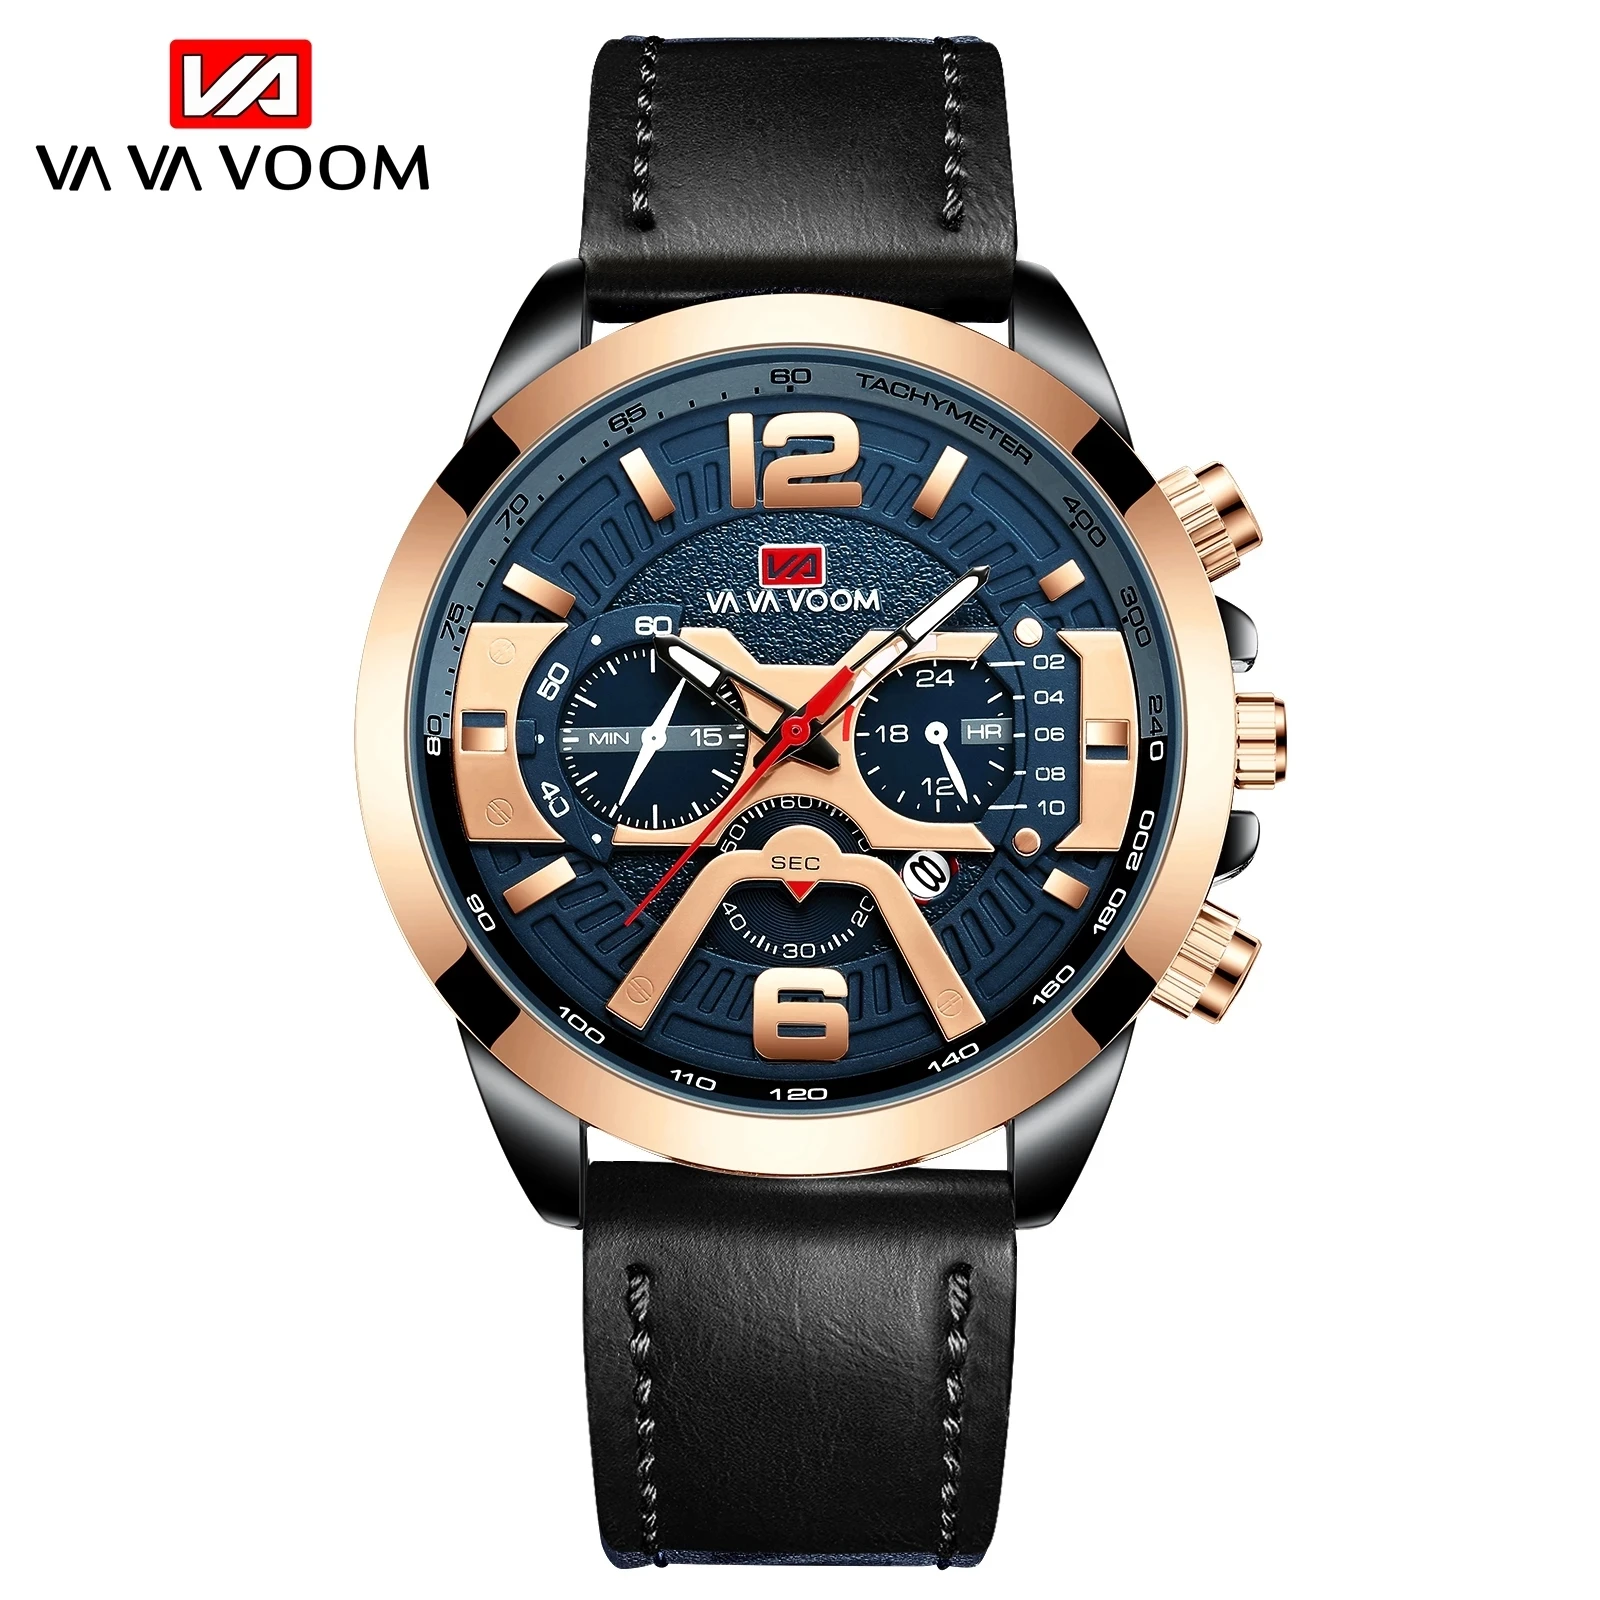 

Men Sport Waterproof Casual Leather Wrist Watches for Men Blue Top Brand Luxury Military Clock Fashion Chronograph Wristwathes